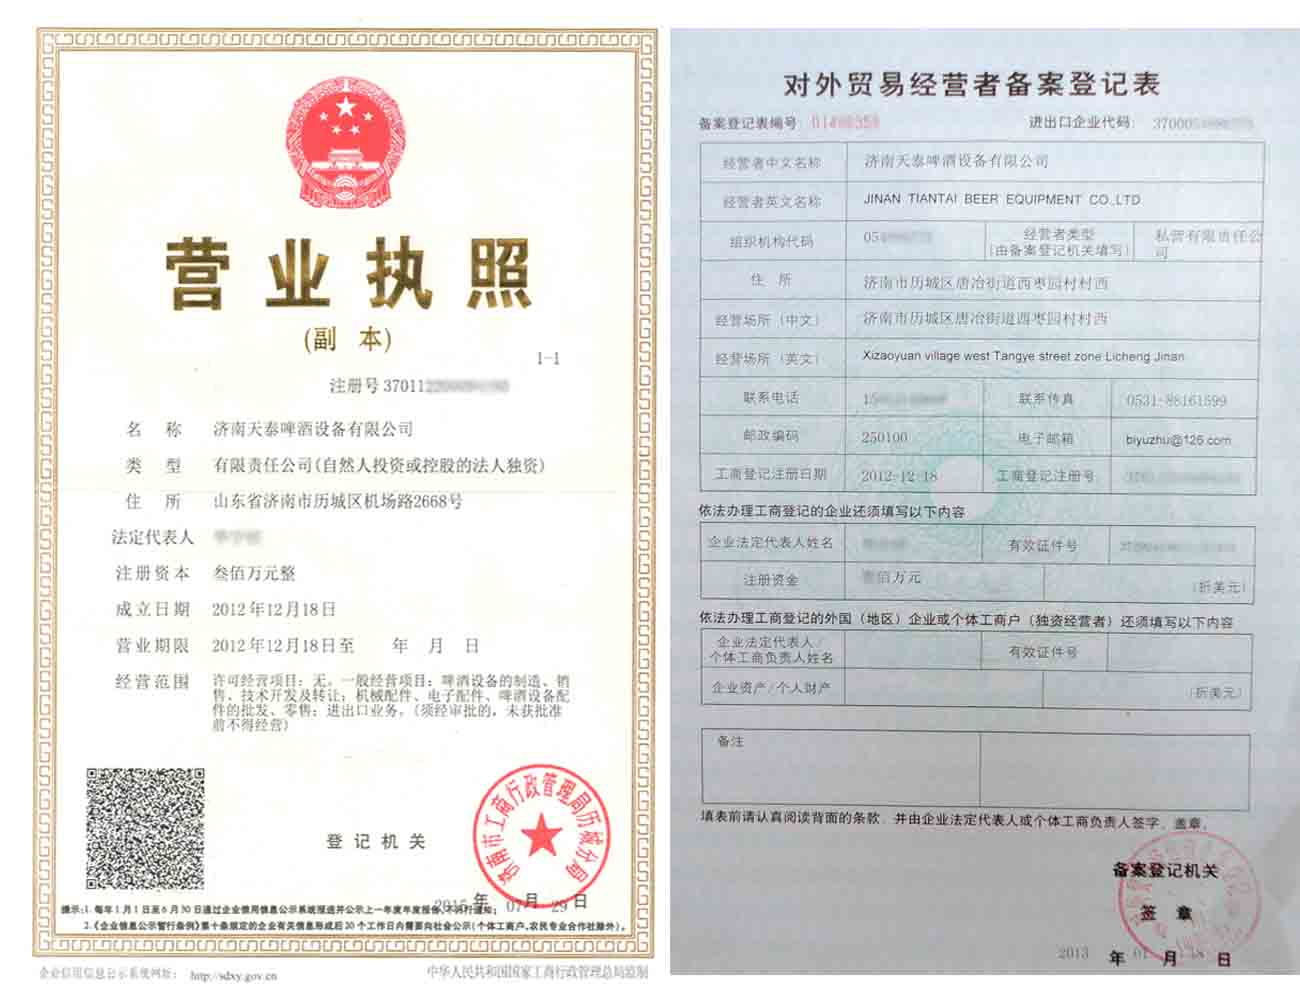 brewery equipment business license